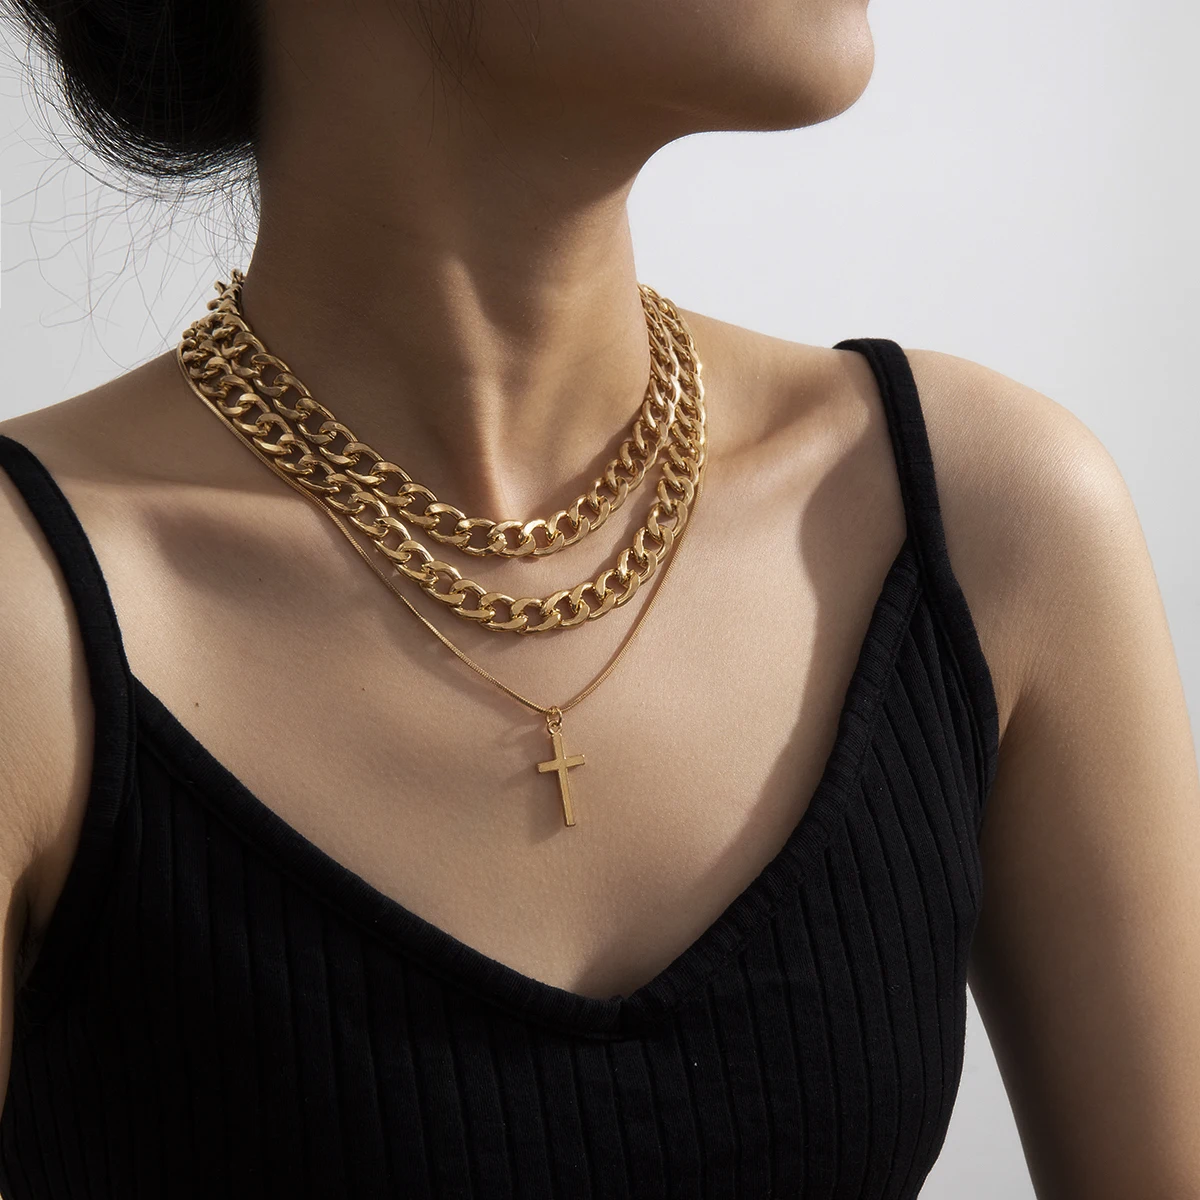 

SHIXIN 3pcs/set Cuban Chain Link Layered Necklace Snake Chain Women Jesus Piece Gold Cross Pendant Necklace Party Jewelry, Silver,gold